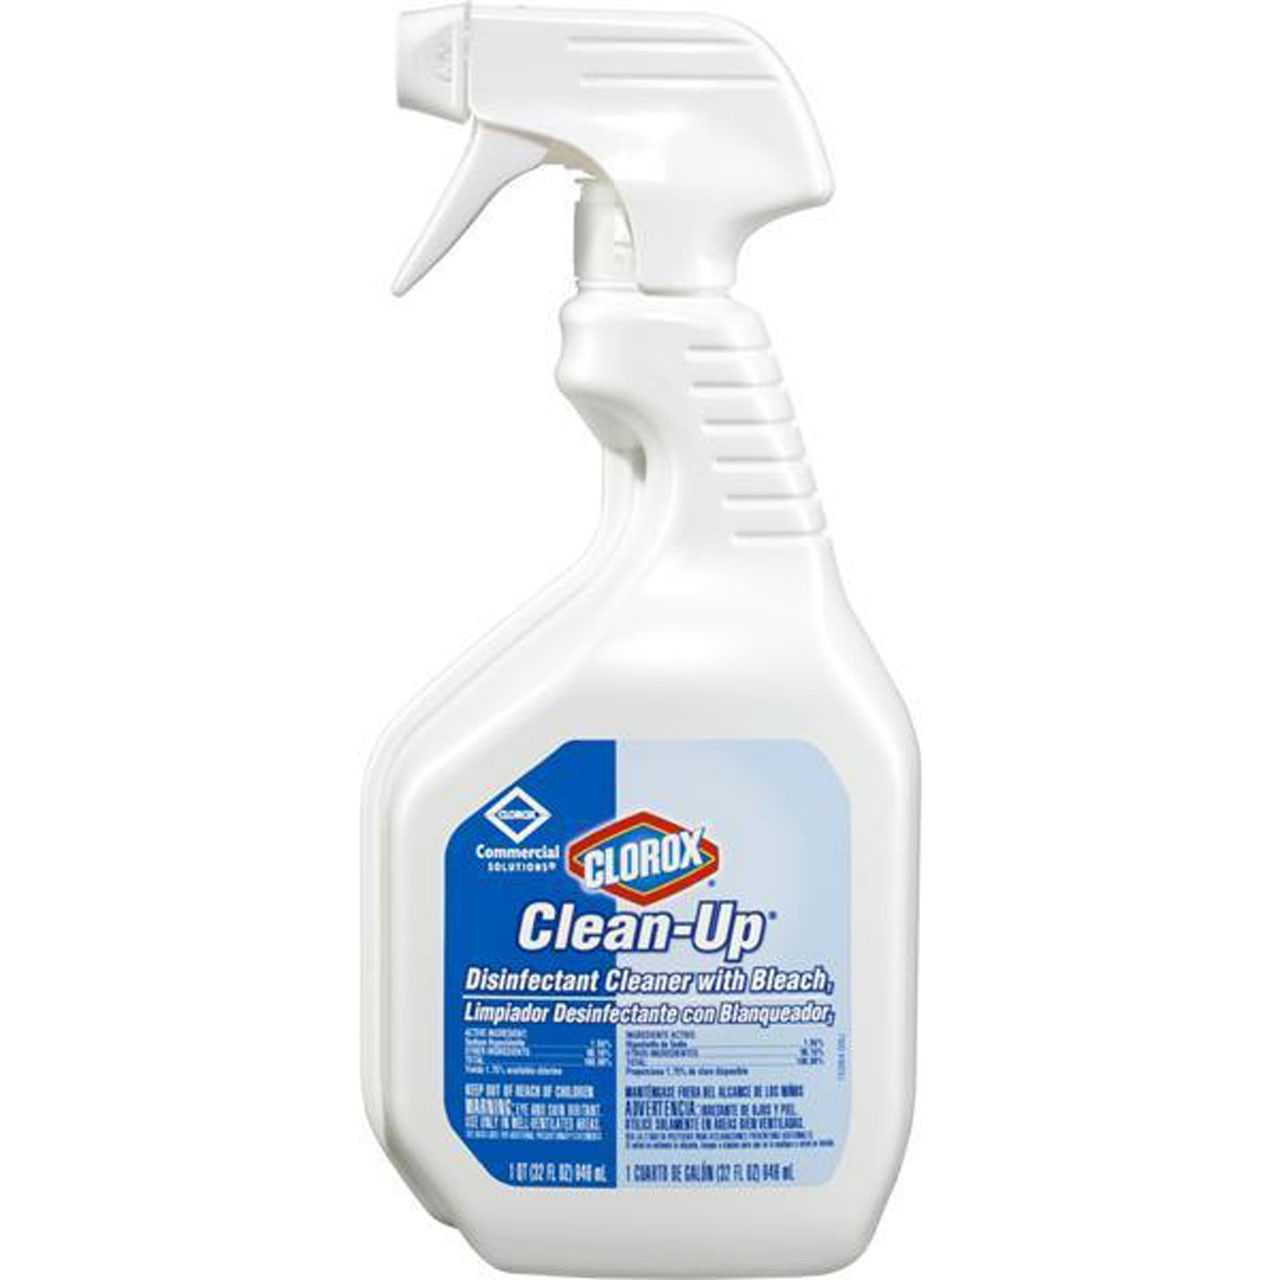 Where is Clorox Clean-Up ideal to be used?